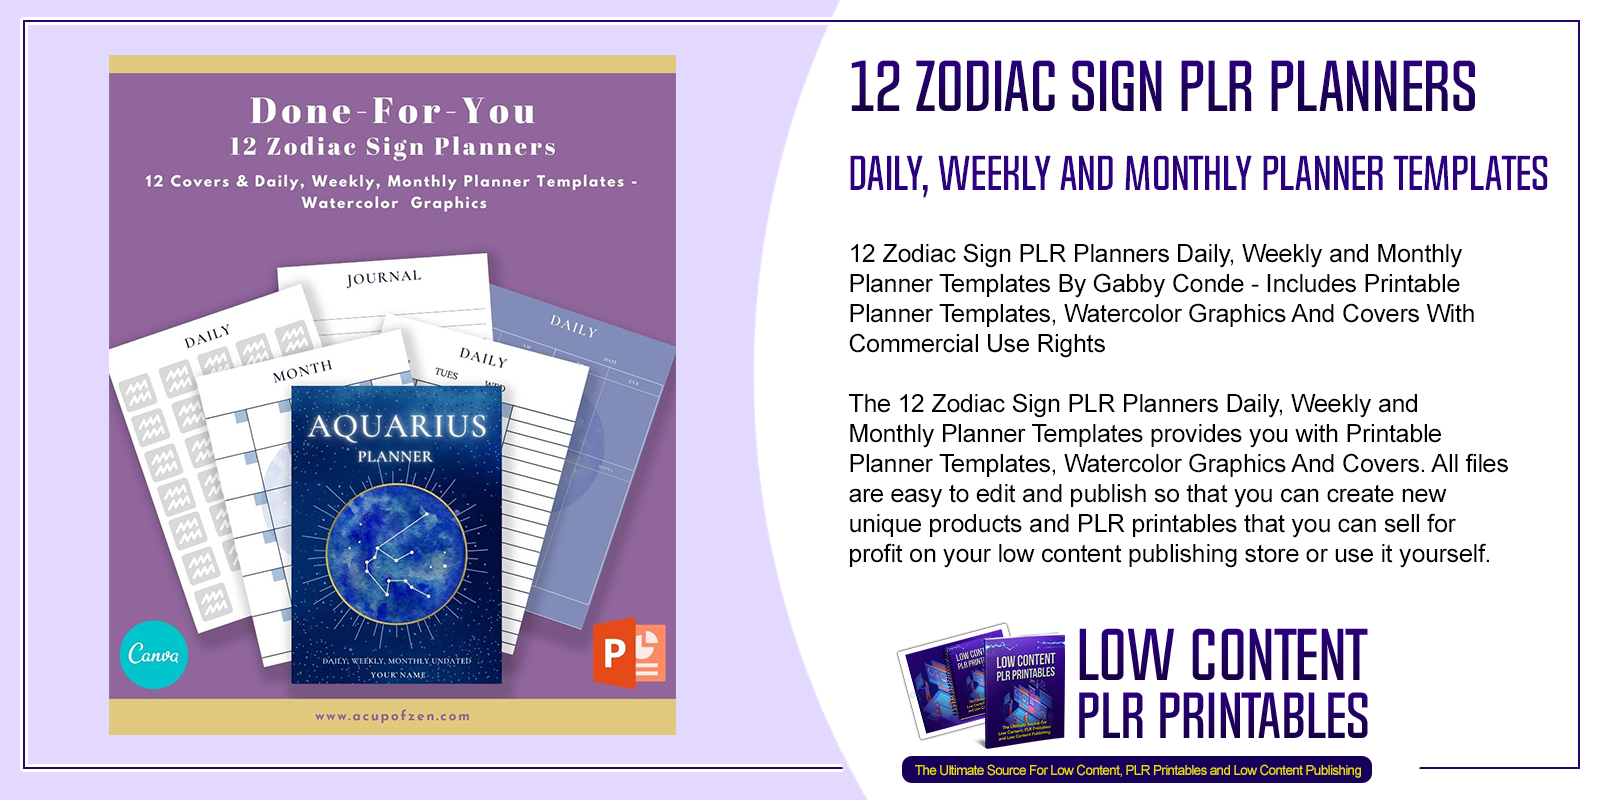 12 Zodiac Sign PLR Planners Daily Weekly and Monthly Planner Templates